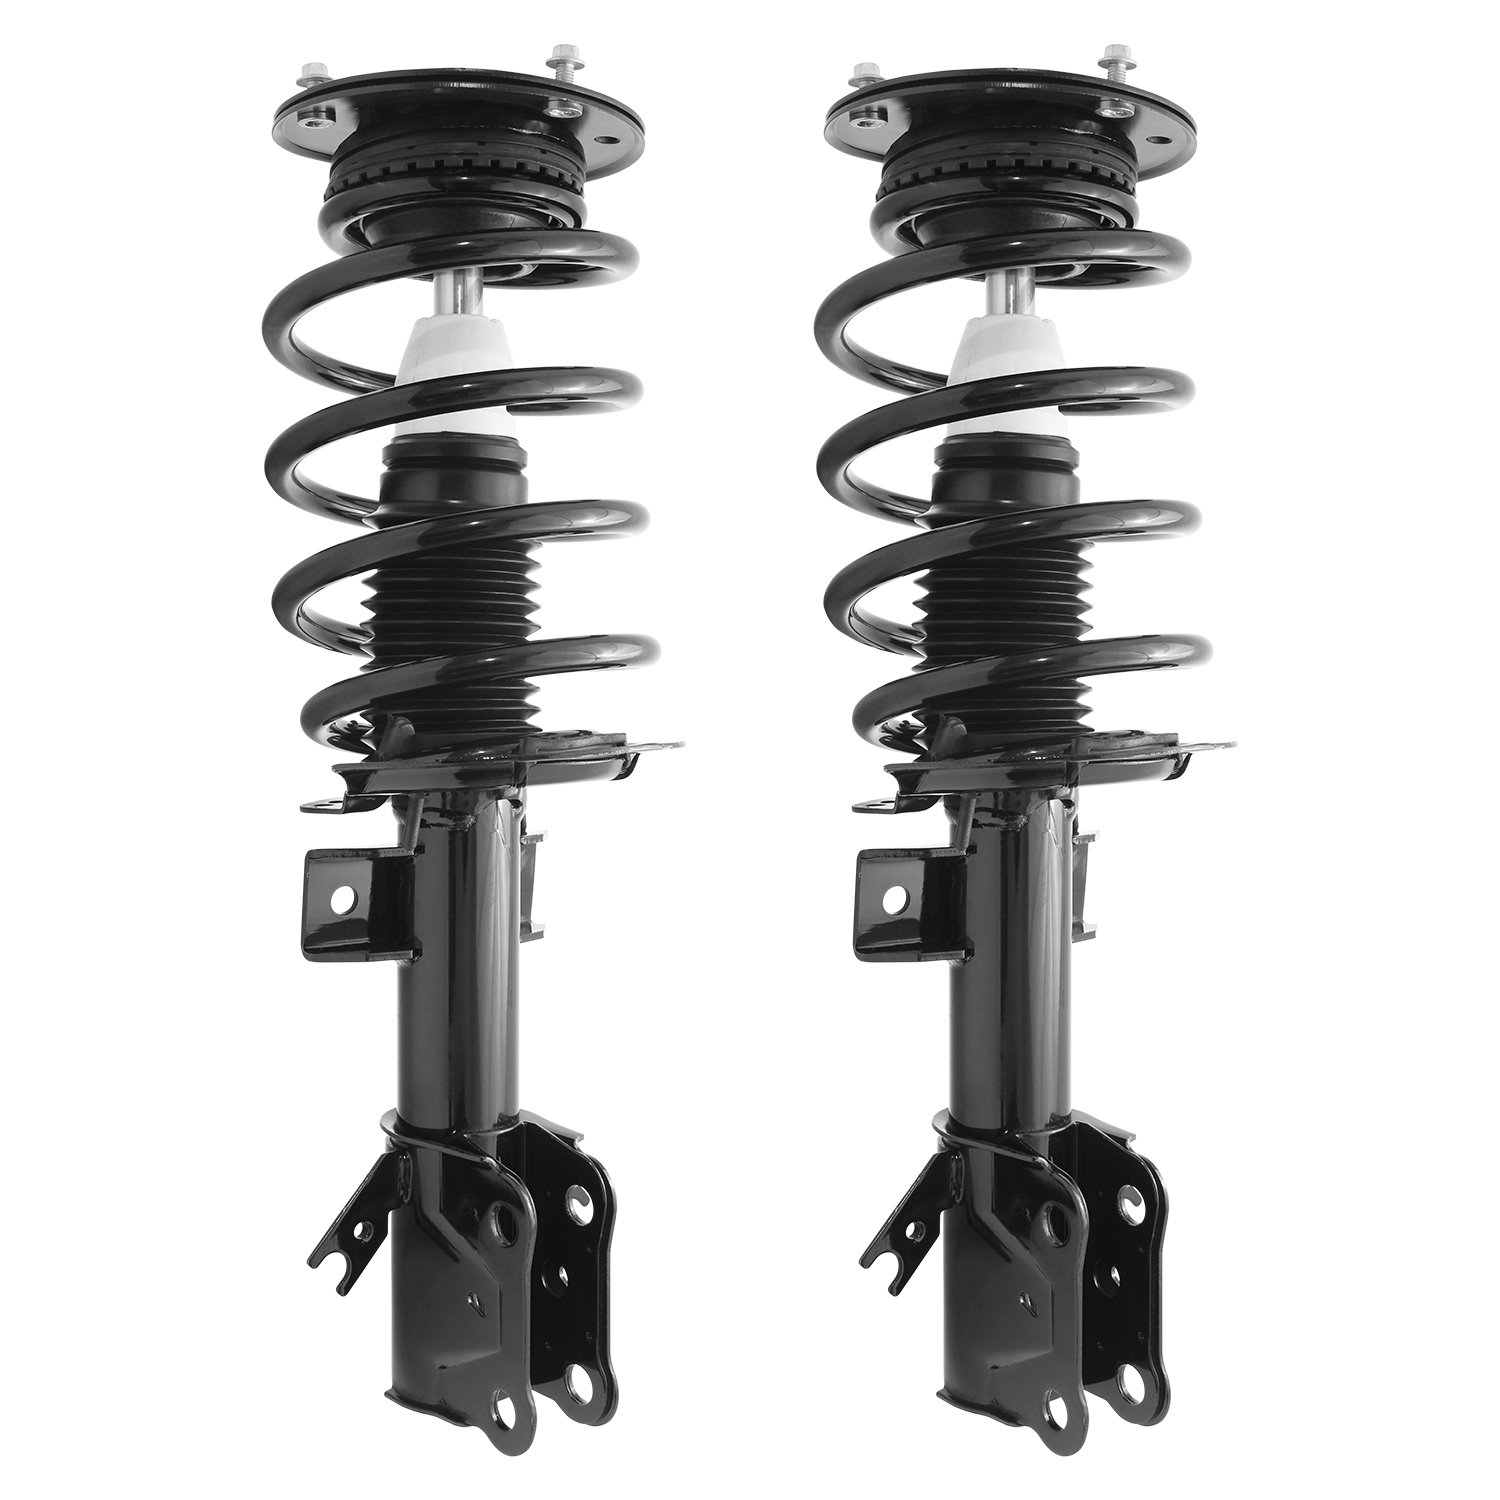 2-11830-001 Suspension Strut & Coil Spring Assembly Set Fits Select Ford Fusion